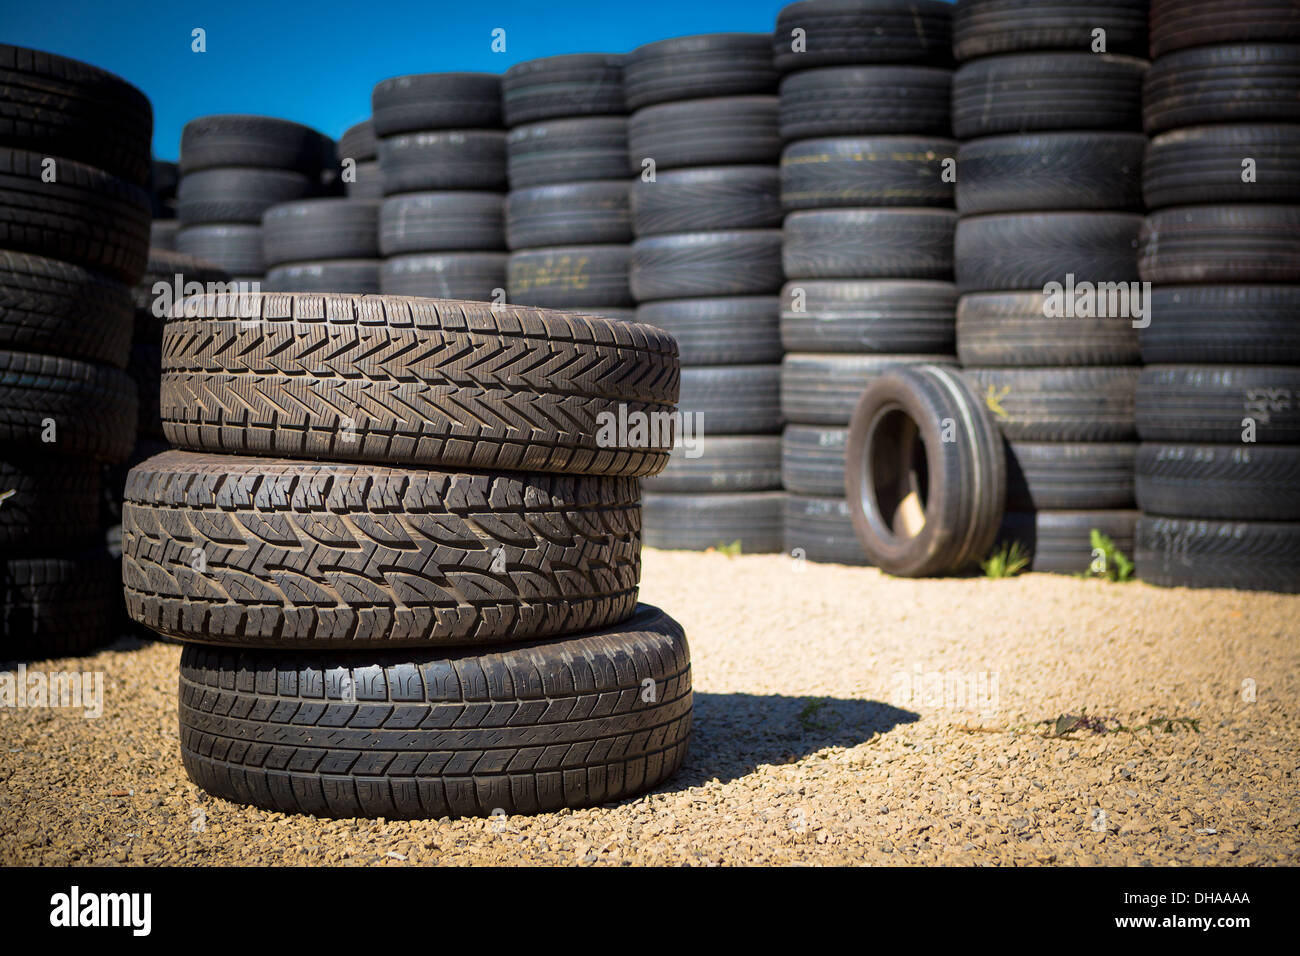 Stack of new tires for sale at a tire store. Stock Photo